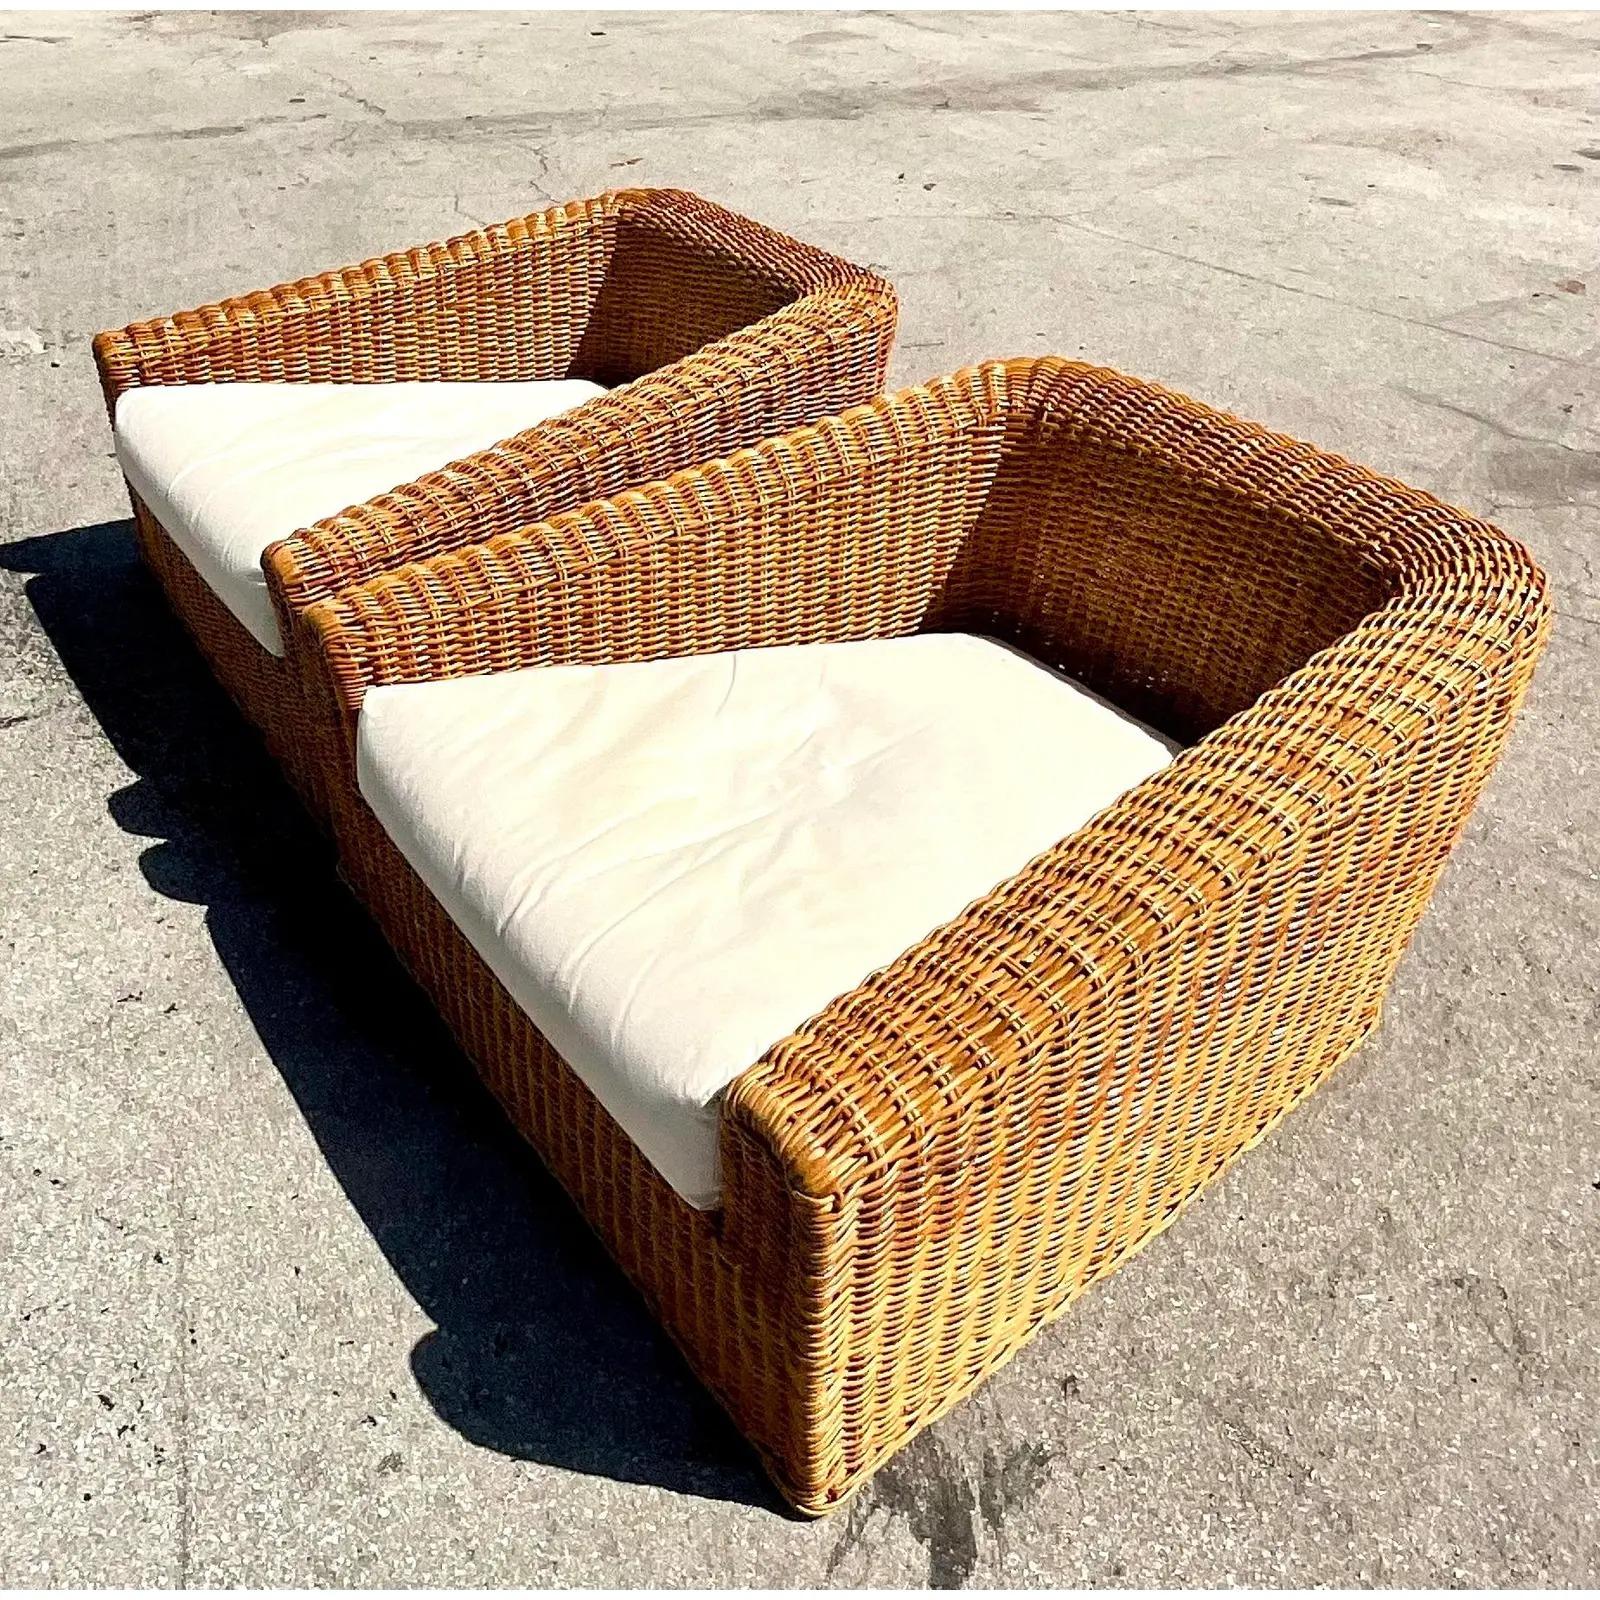 Incredible pair of vintage coastal lounge chairs. Designed by the incomparable Michael Taylor. Produced by Wicker Wicker California. A chic angular shape and white cotton duck upholstery. Matching sofa also available. Acquired from a Palm Beach